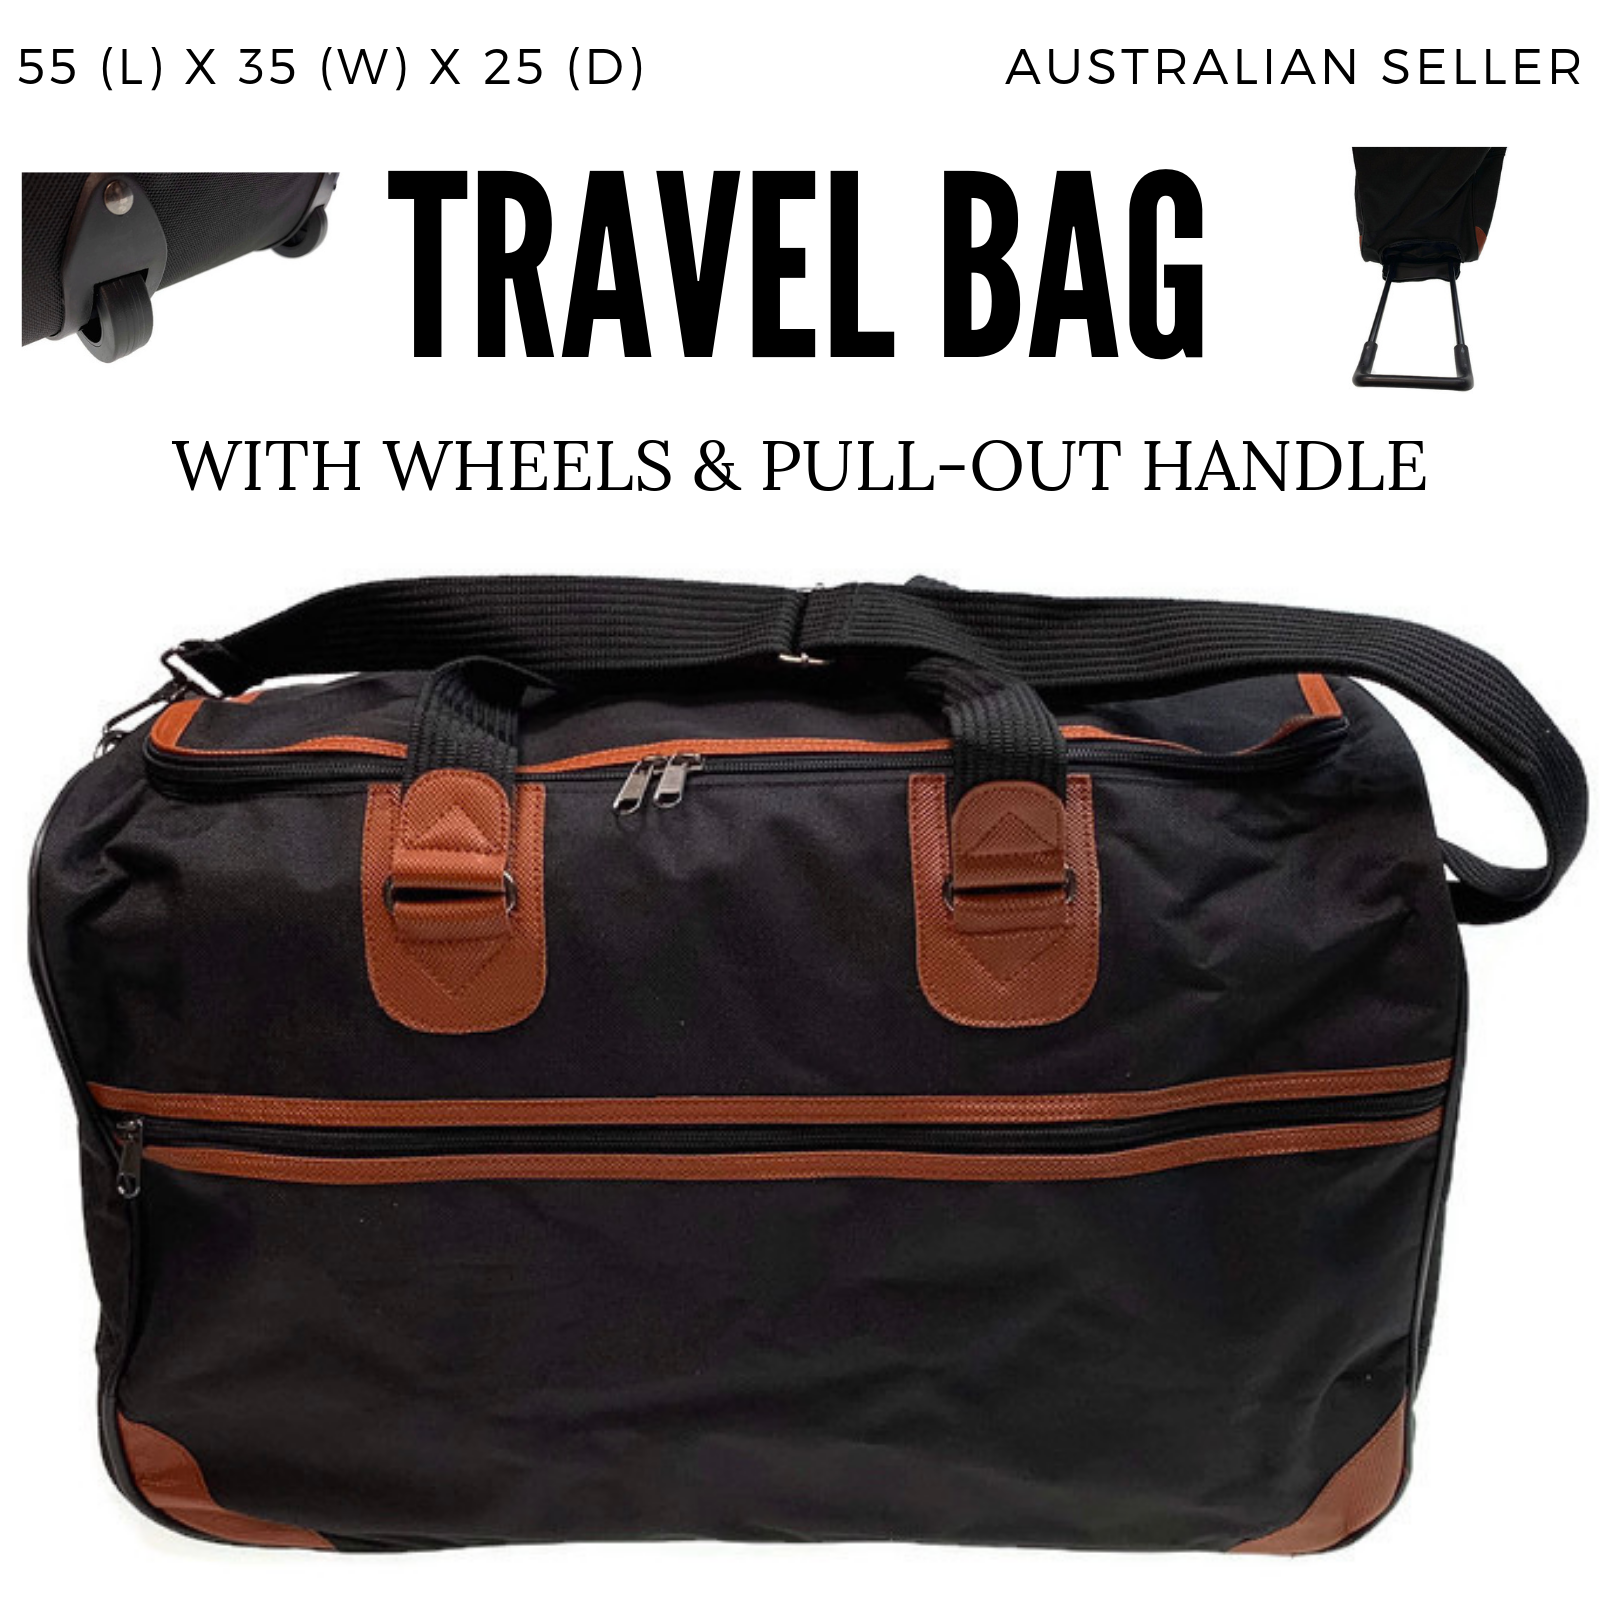 Luxury Duffle Bag With Wheels For Sale In Nc | semashow.com